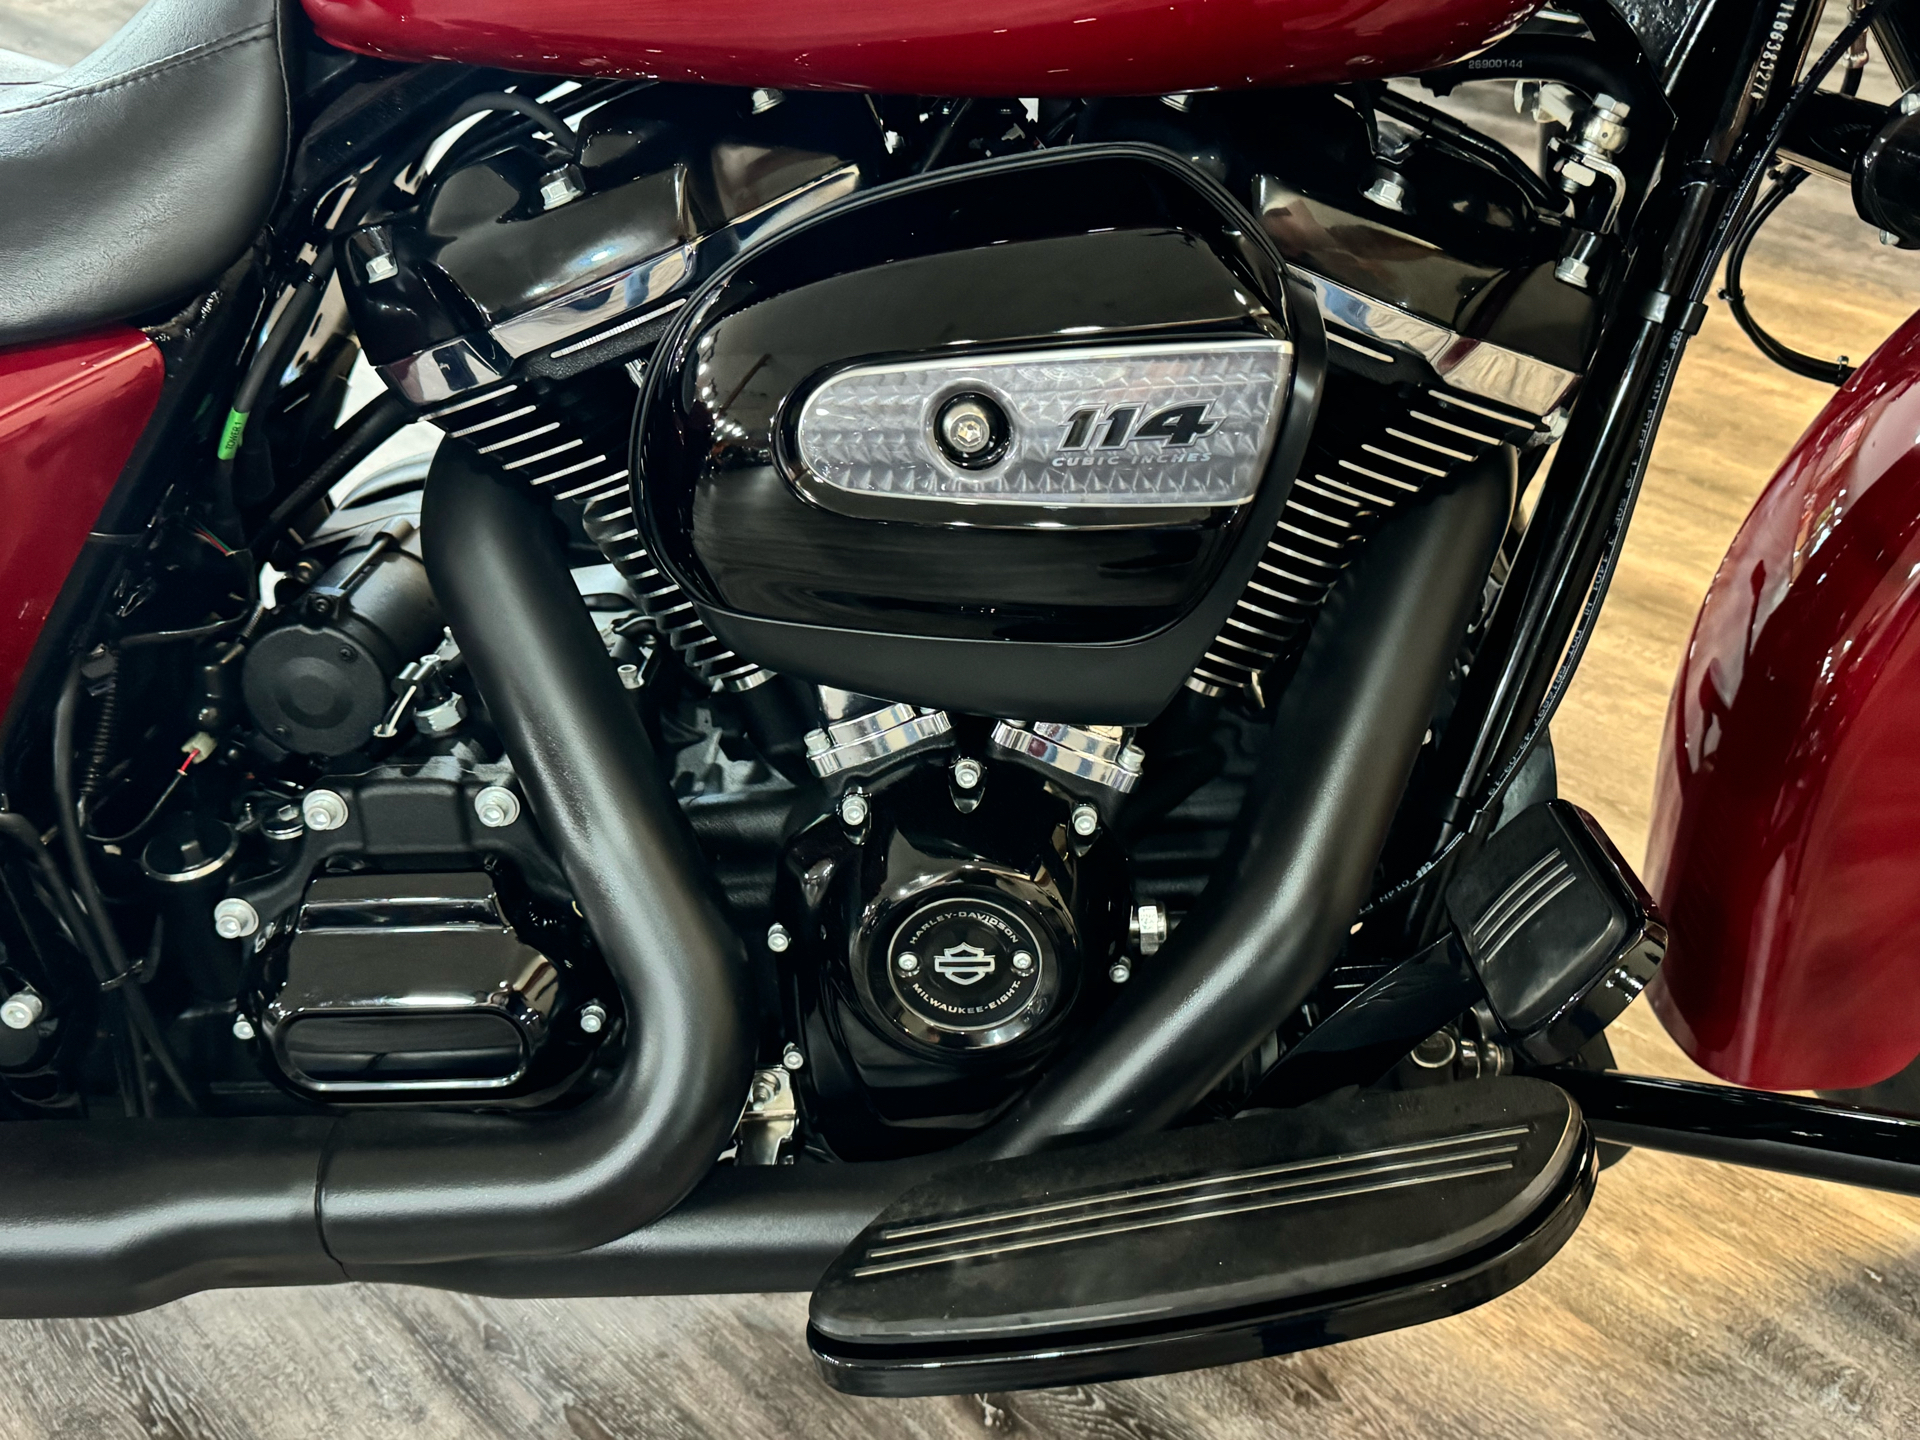 2020 Harley-Davidson Road Glide® Special in Knoxville, Tennessee - Photo 8